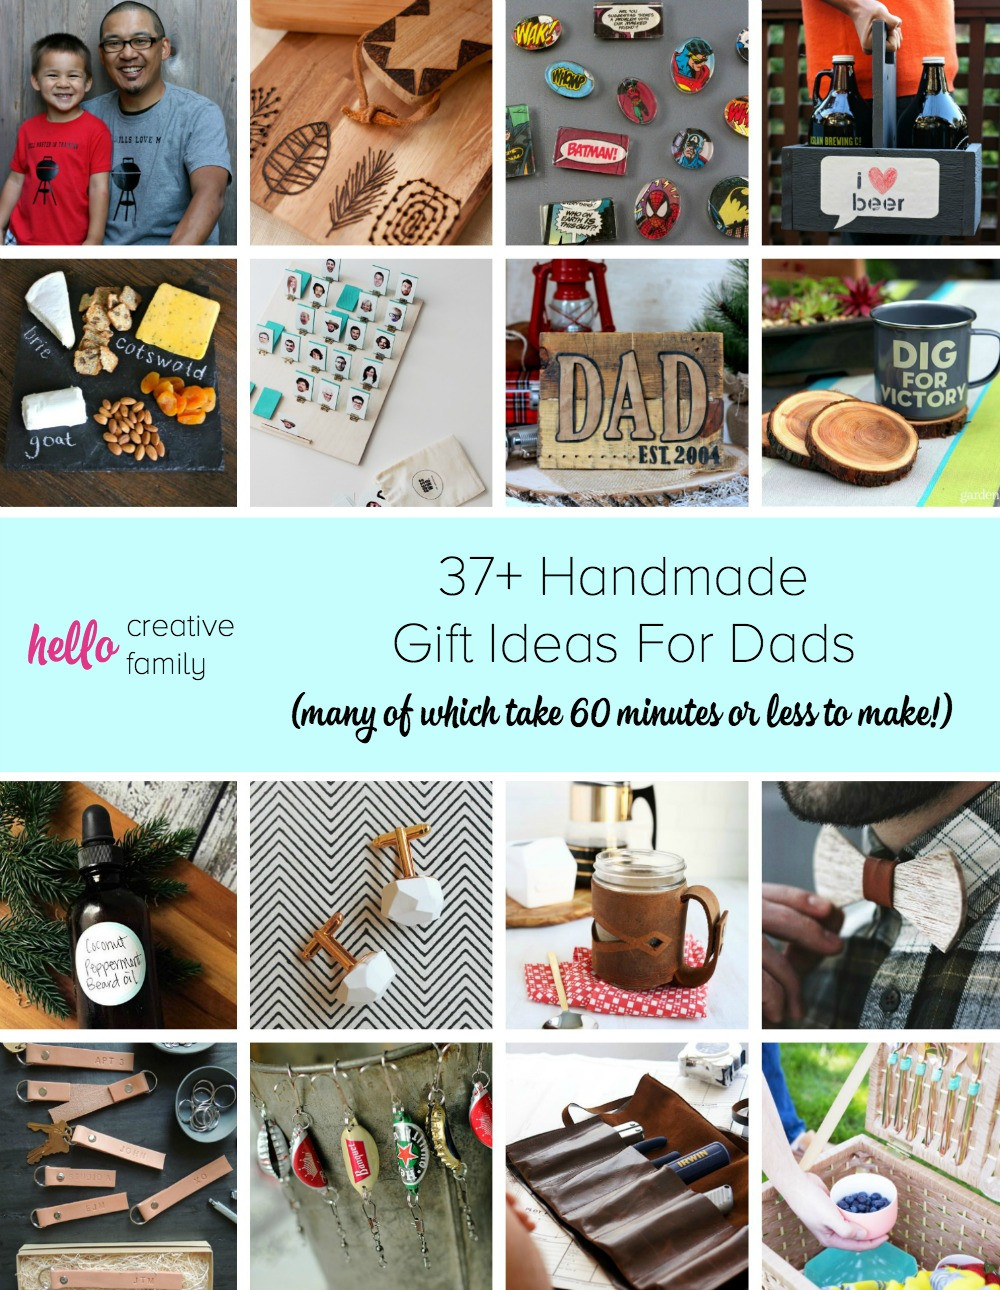 DIY Gift For Dad Christmas
 37 Handmade Gift Ideas For Dads many of which take 60